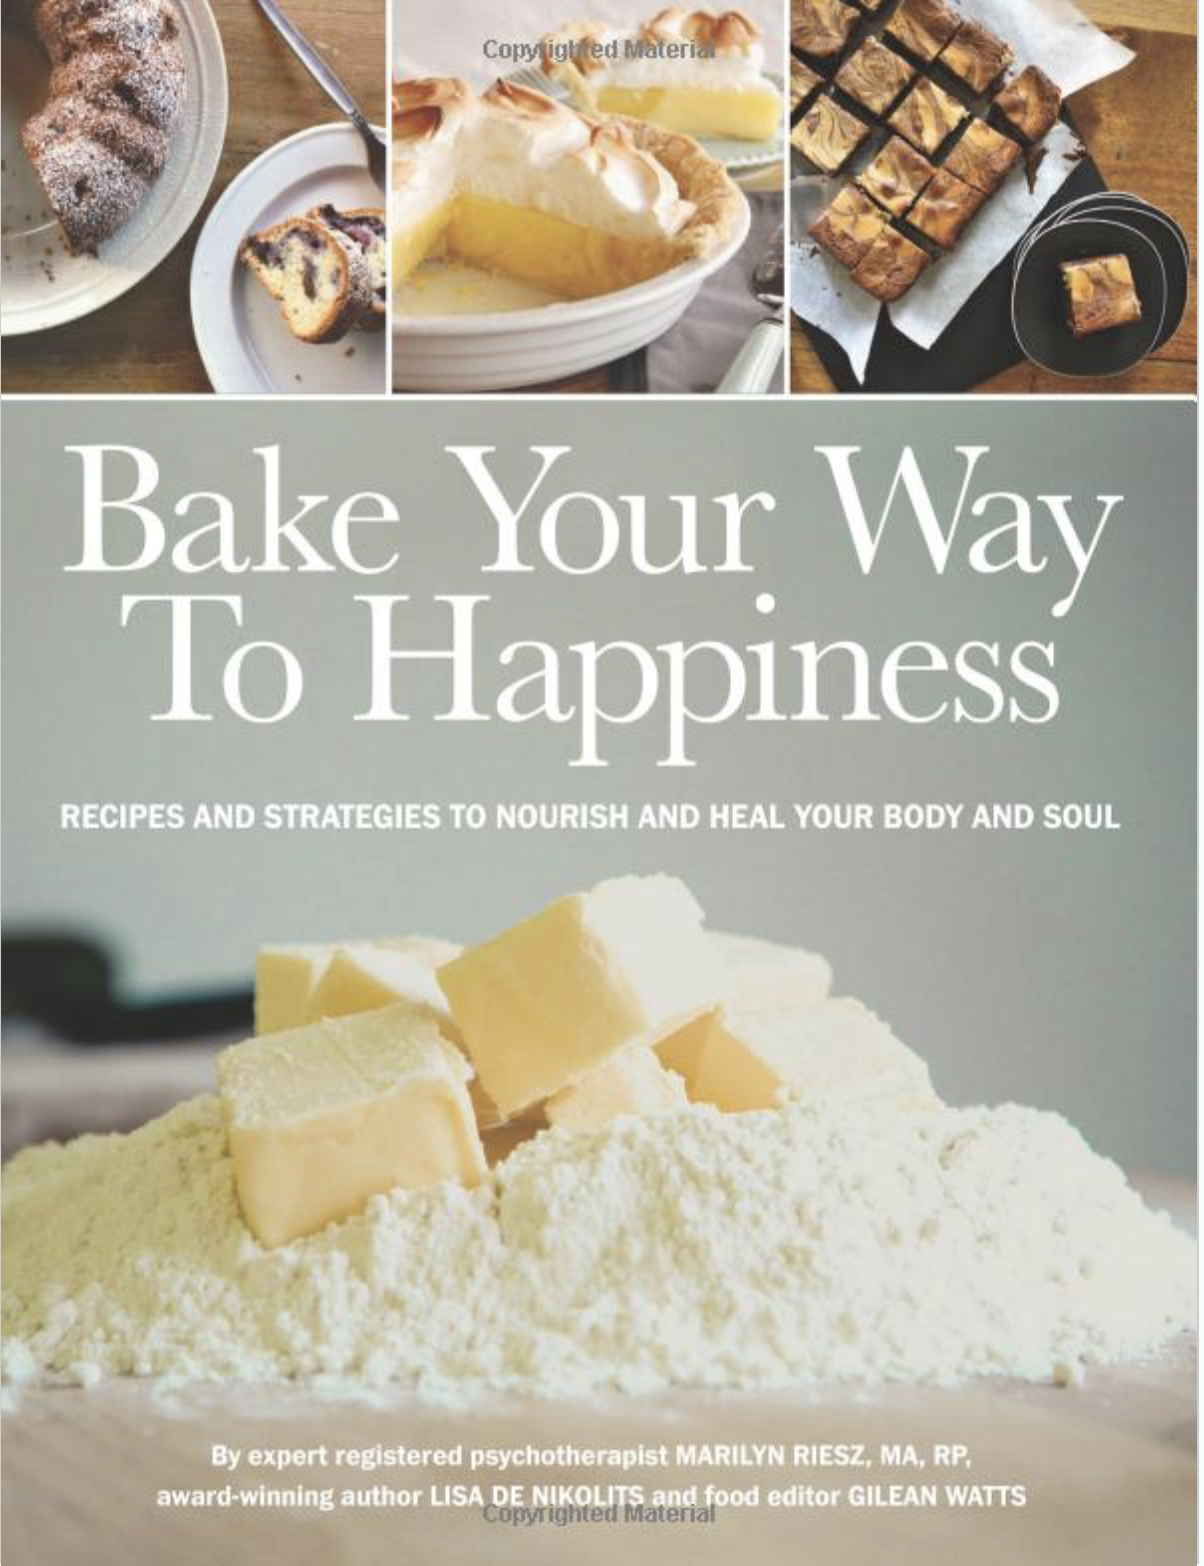 Bake Your Way To Happiness by Lisa de Nikolits